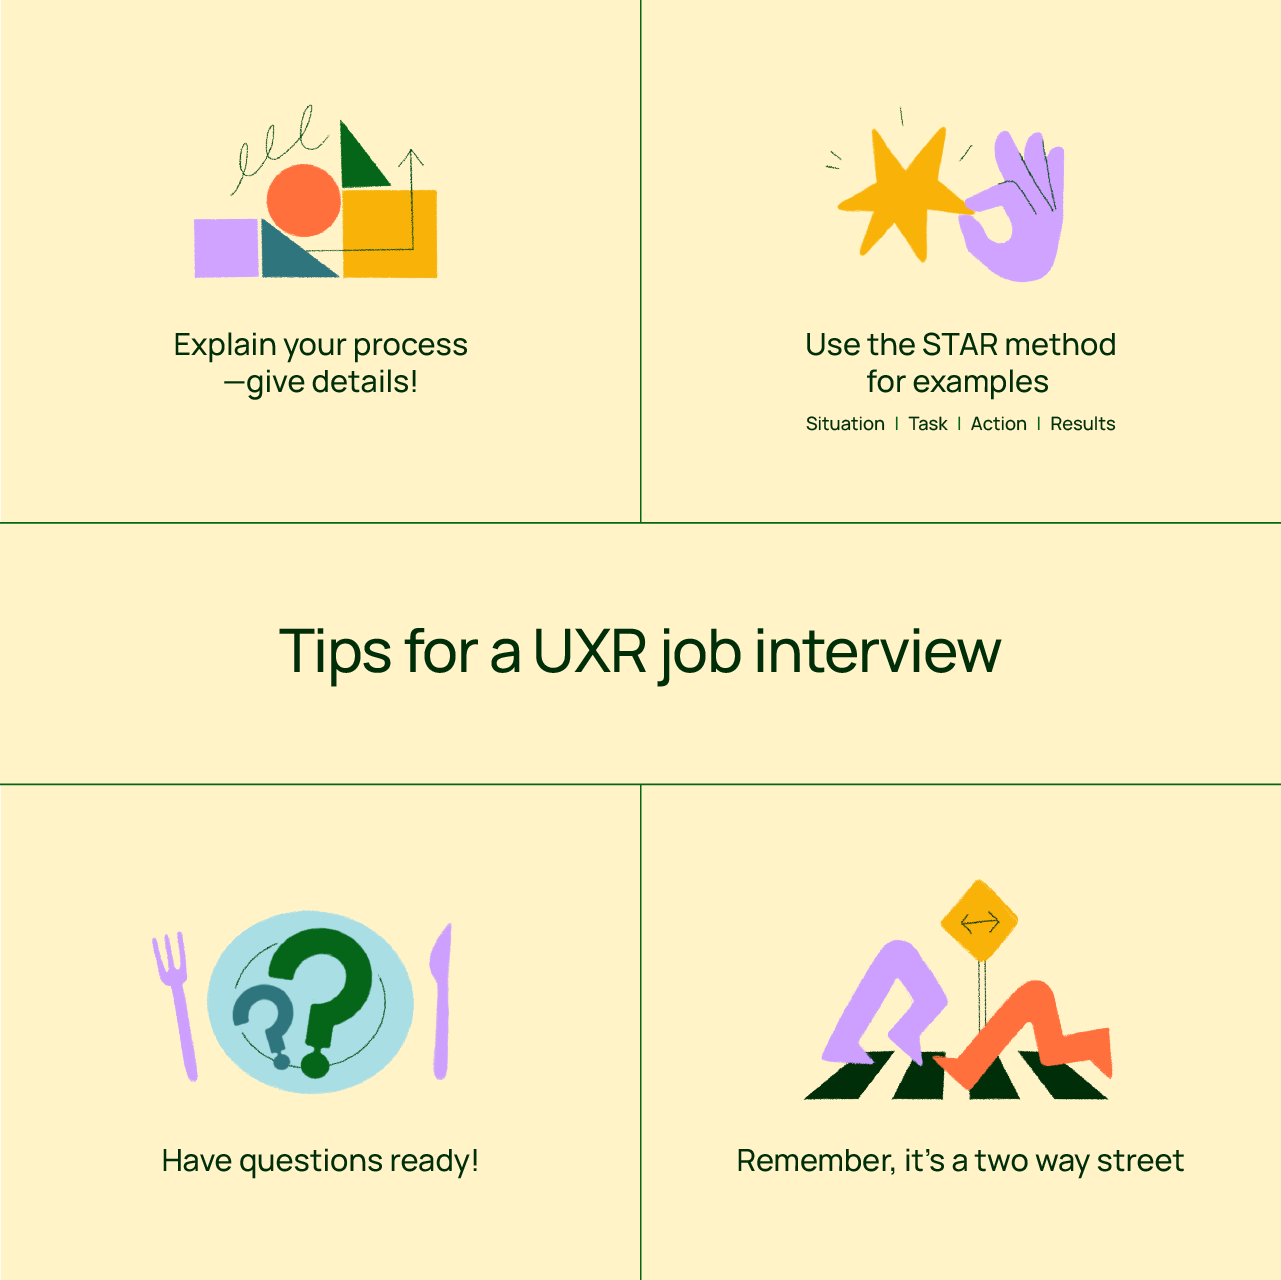 Remember these areas to nail your UXR job interview. And as always—remember it’s a two-way street!